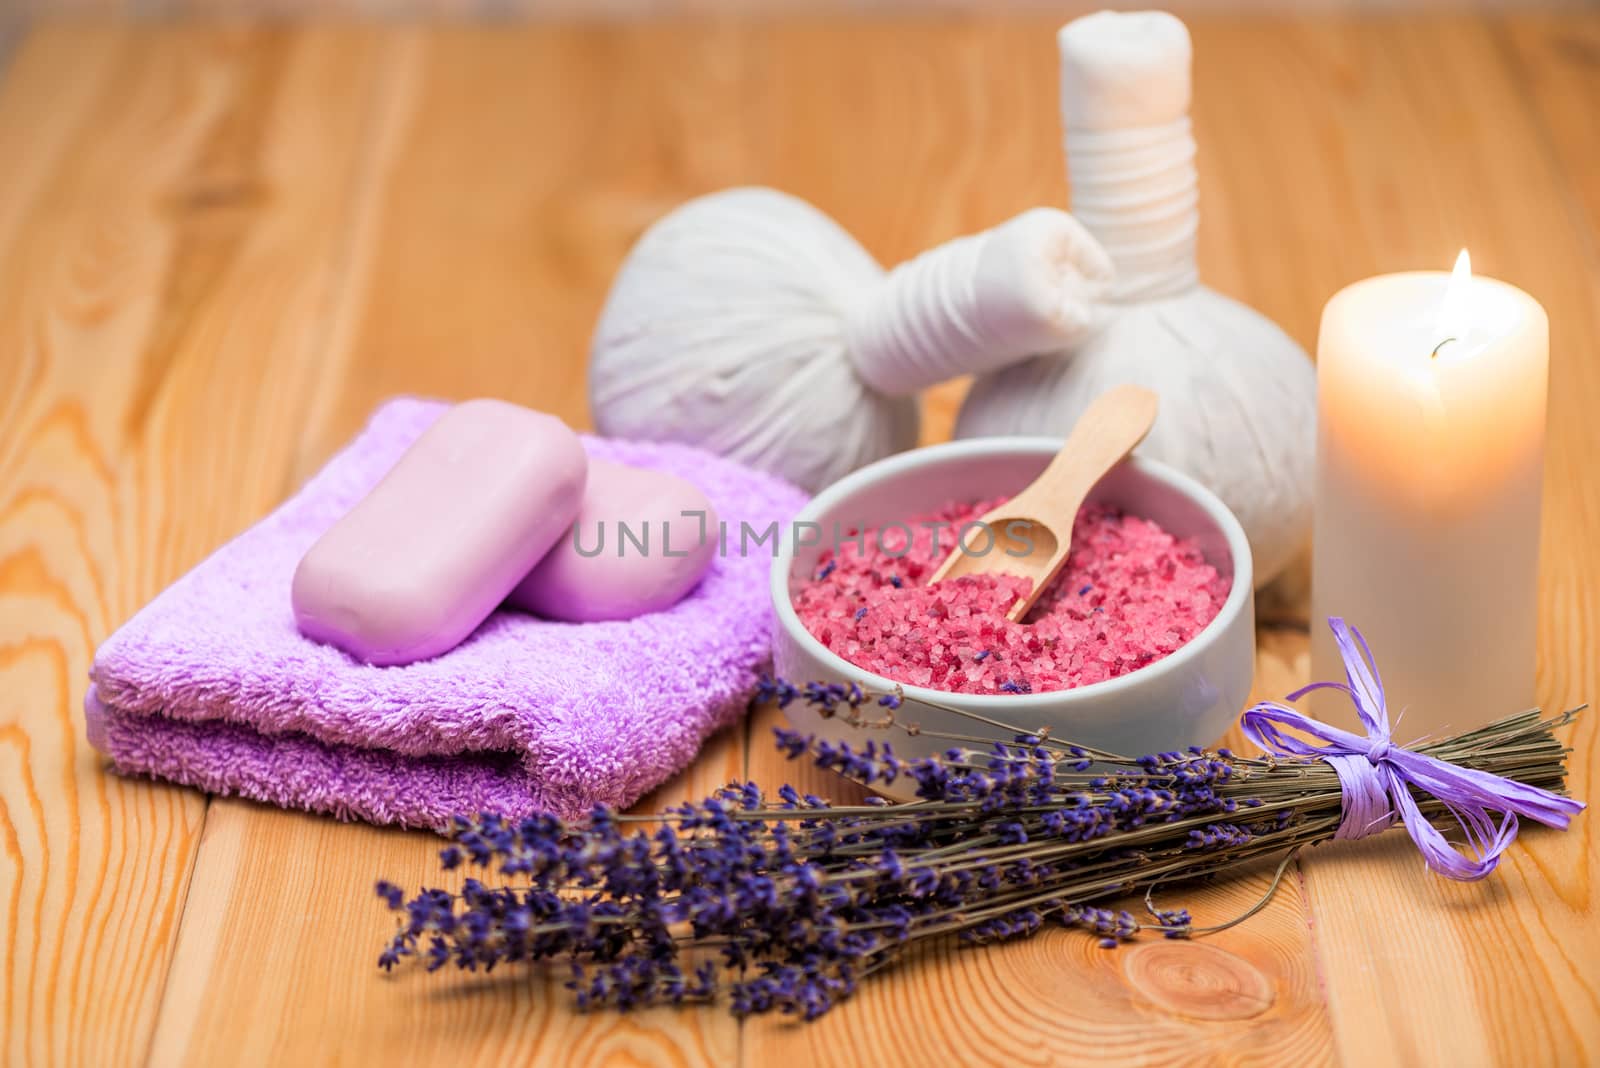 massage and spa objects with lavender, burning candle for relax objects close up